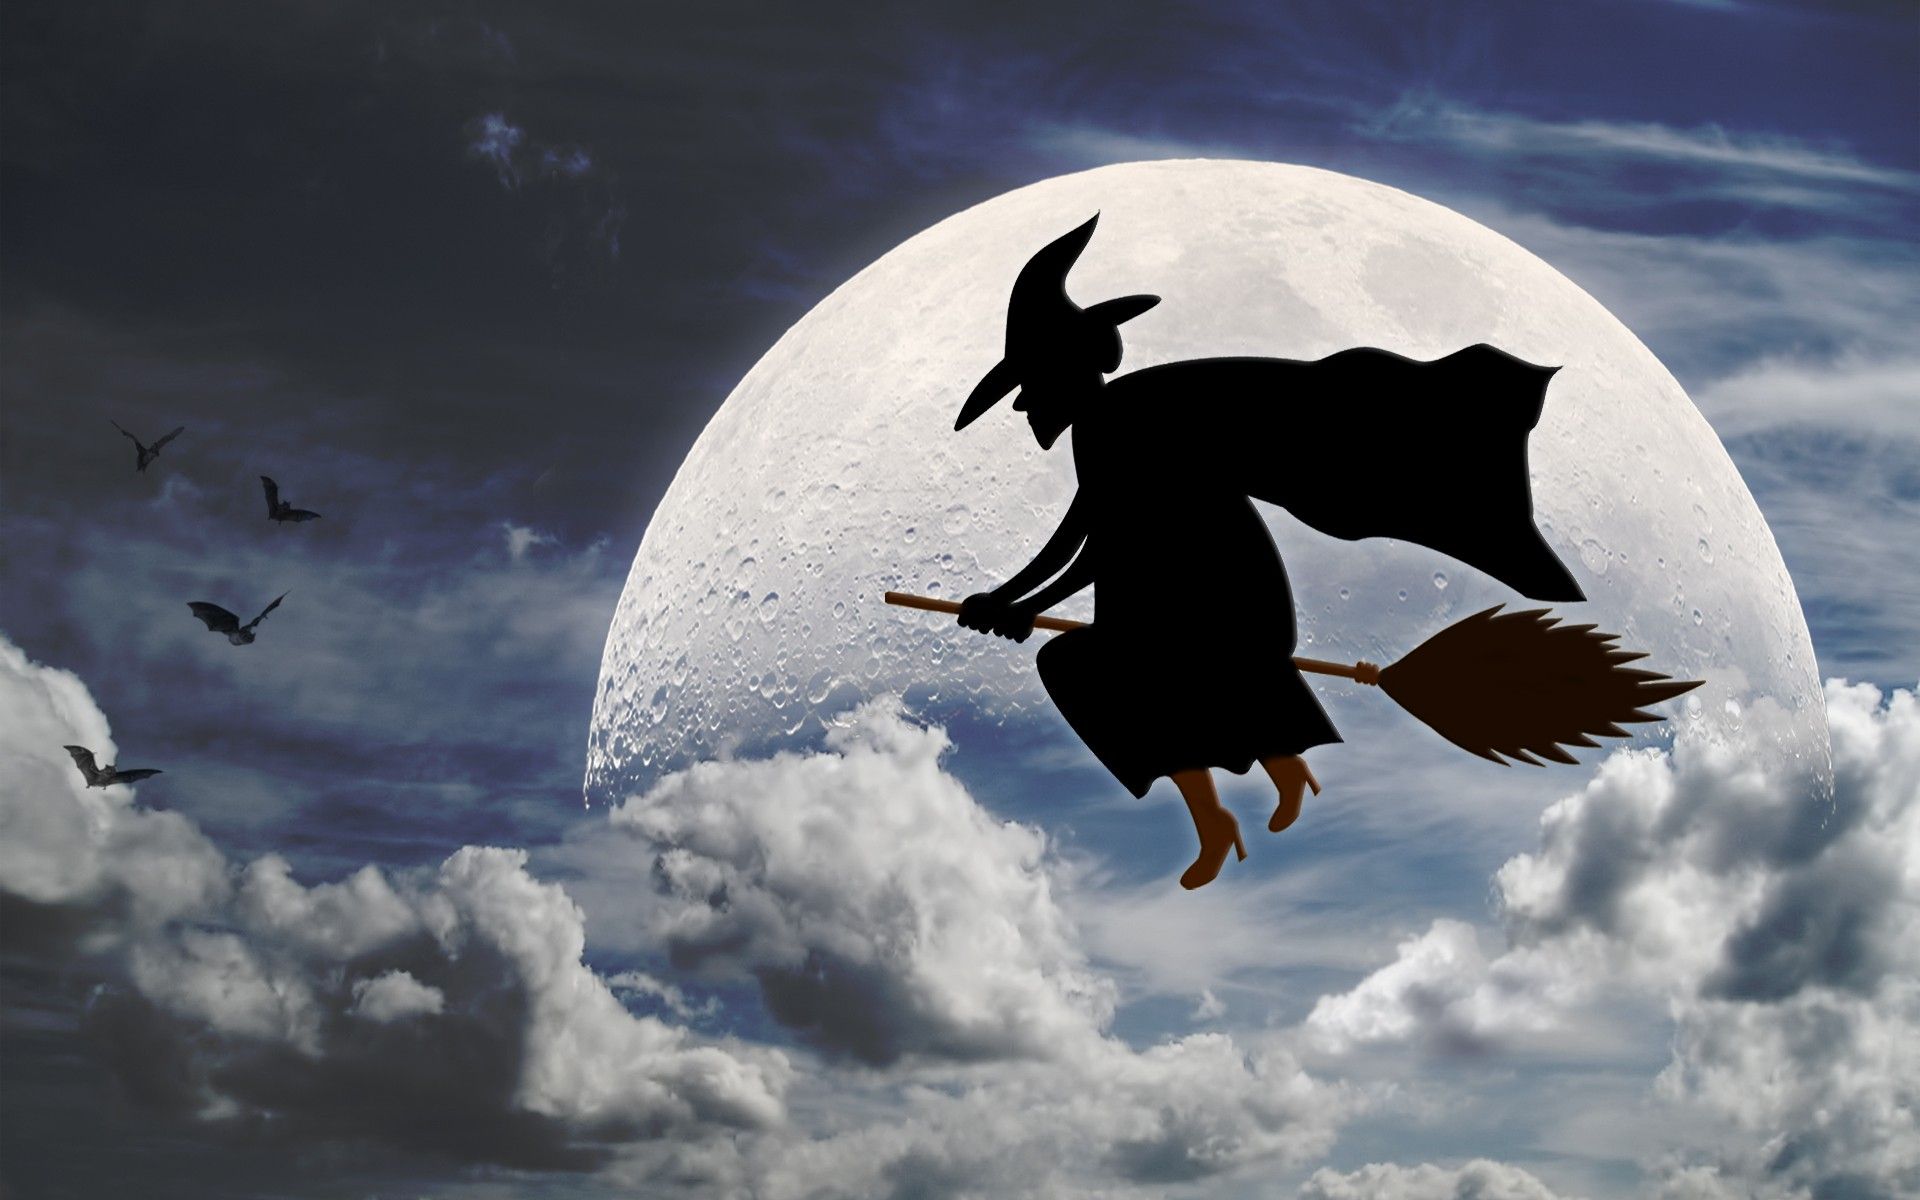 Halloween Broom Stick Witch HD Wallpaper. Witch Wallpaper, Halloween Image, Scary Halloween